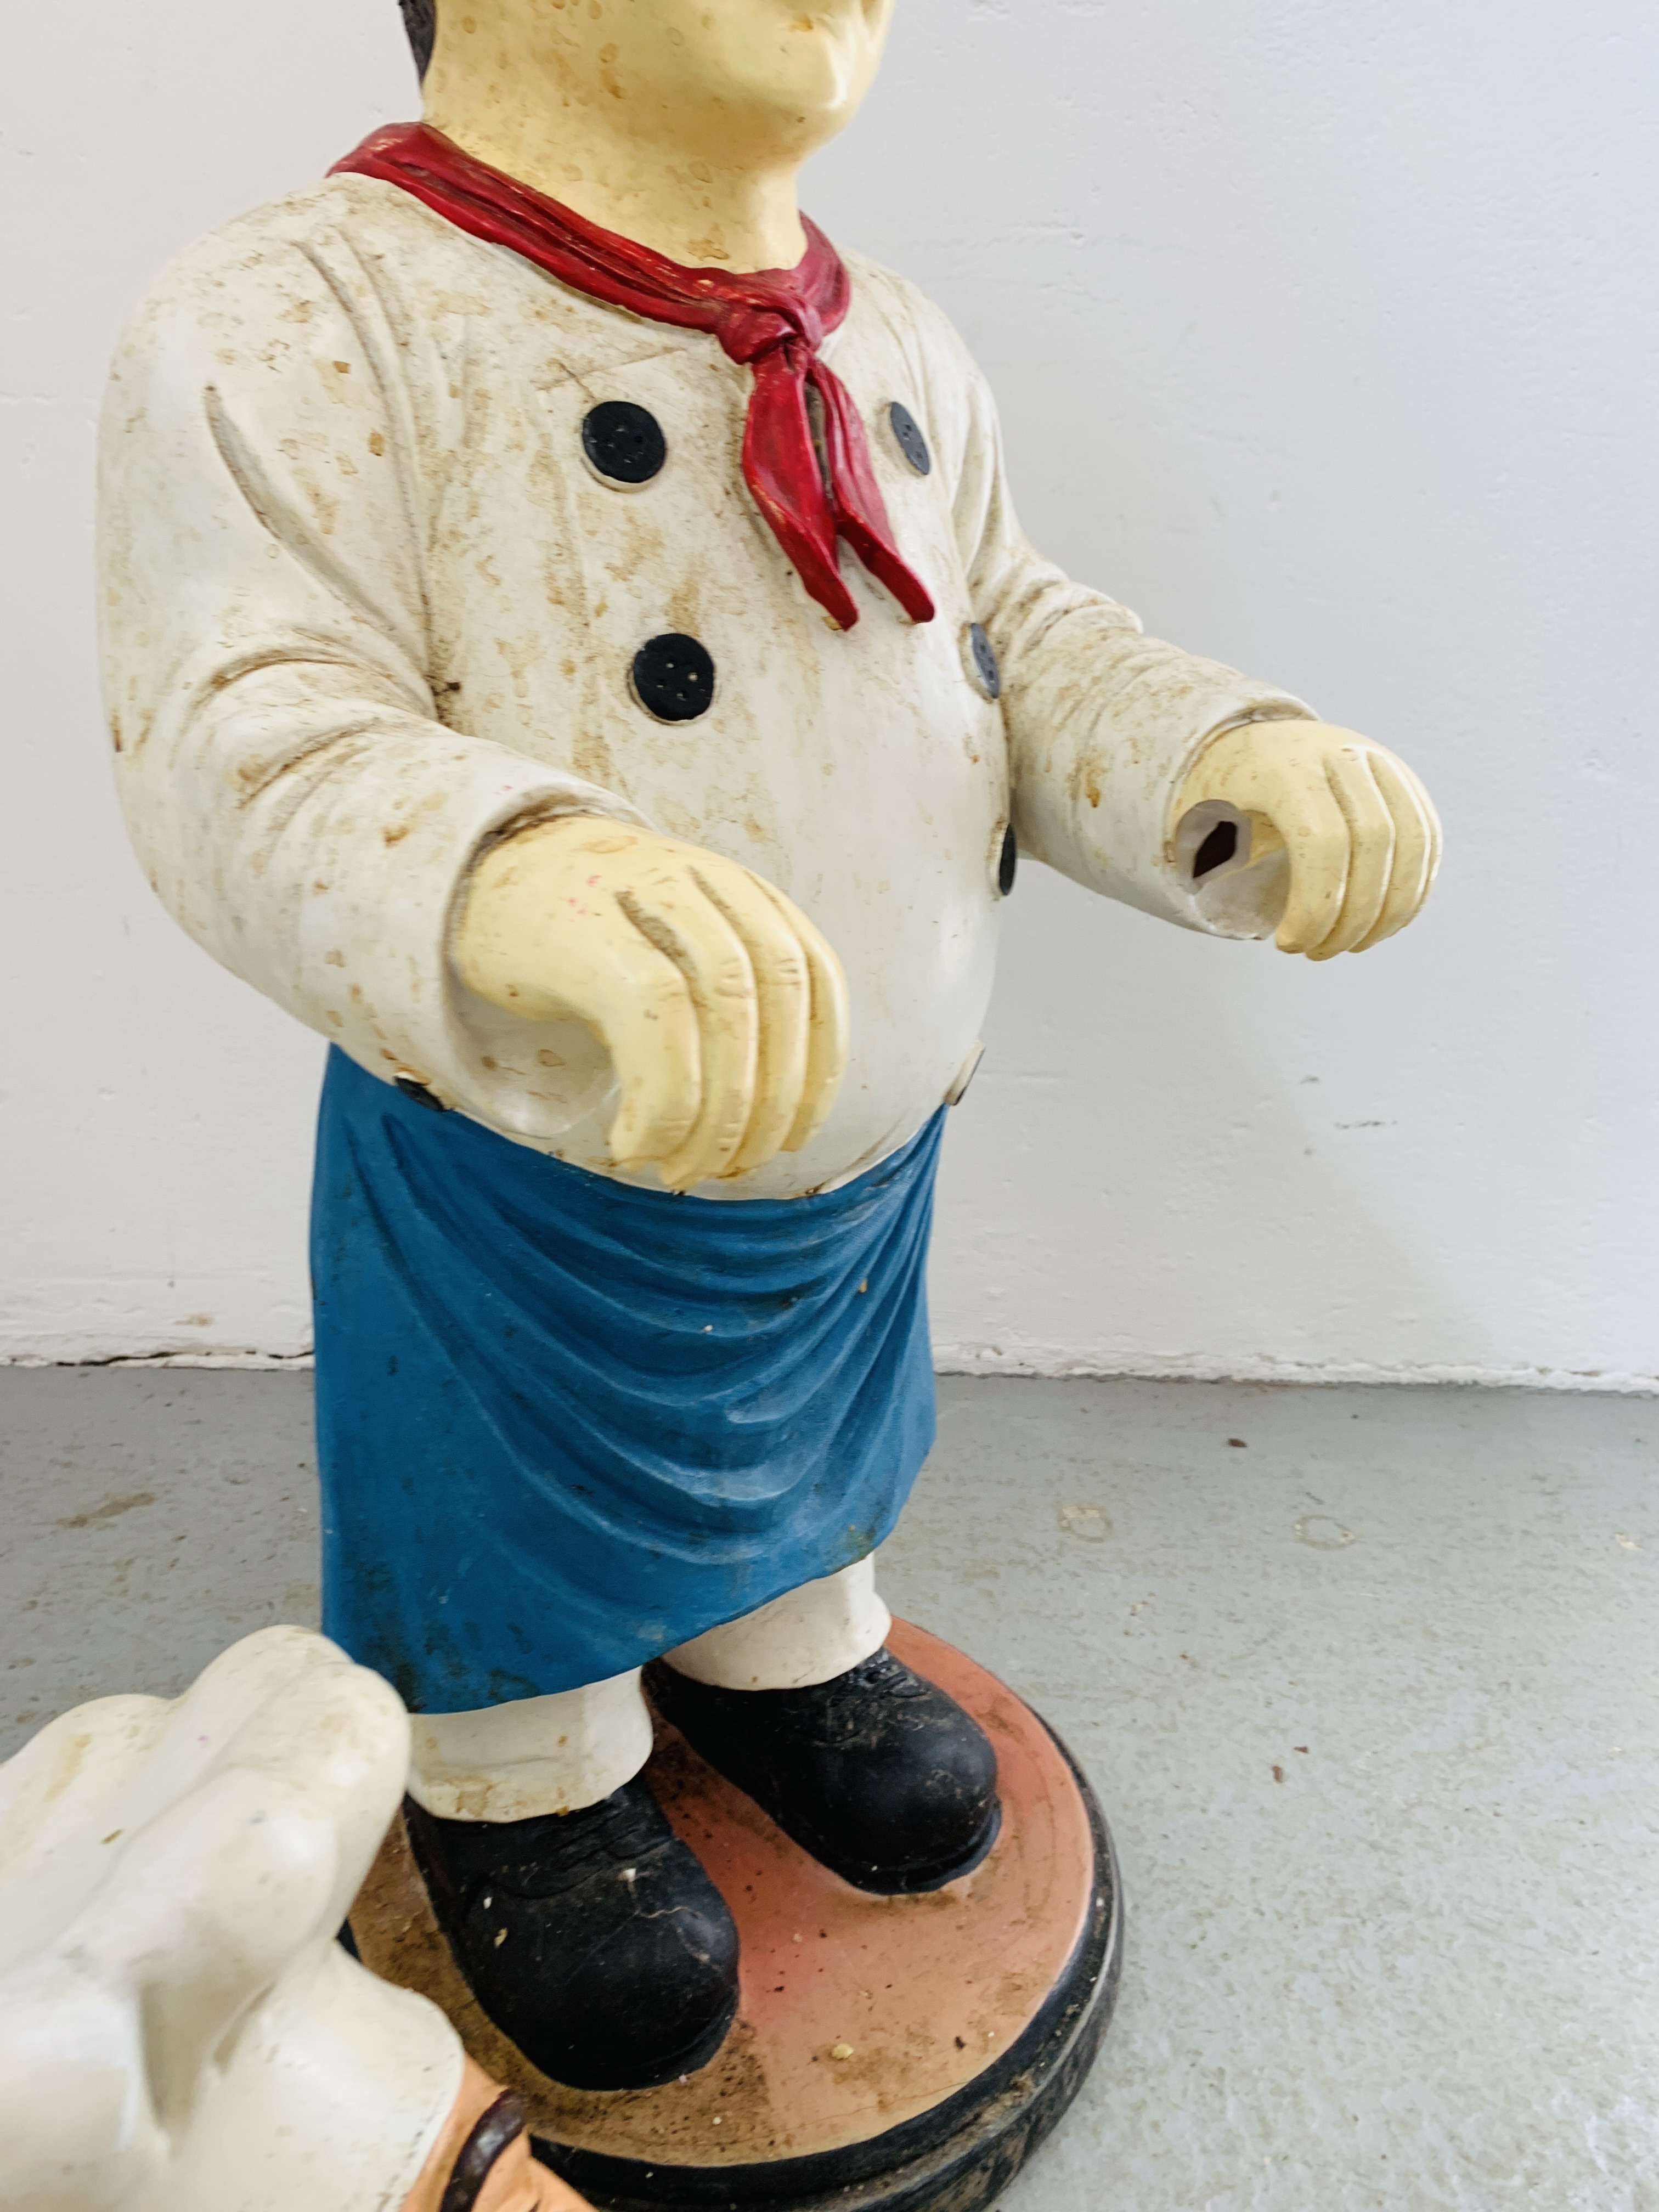 A NOVELTY STANDING "CHEF" FIGURE A/F AND ONE OTHER "CHEF" FIGURE - Image 8 of 12